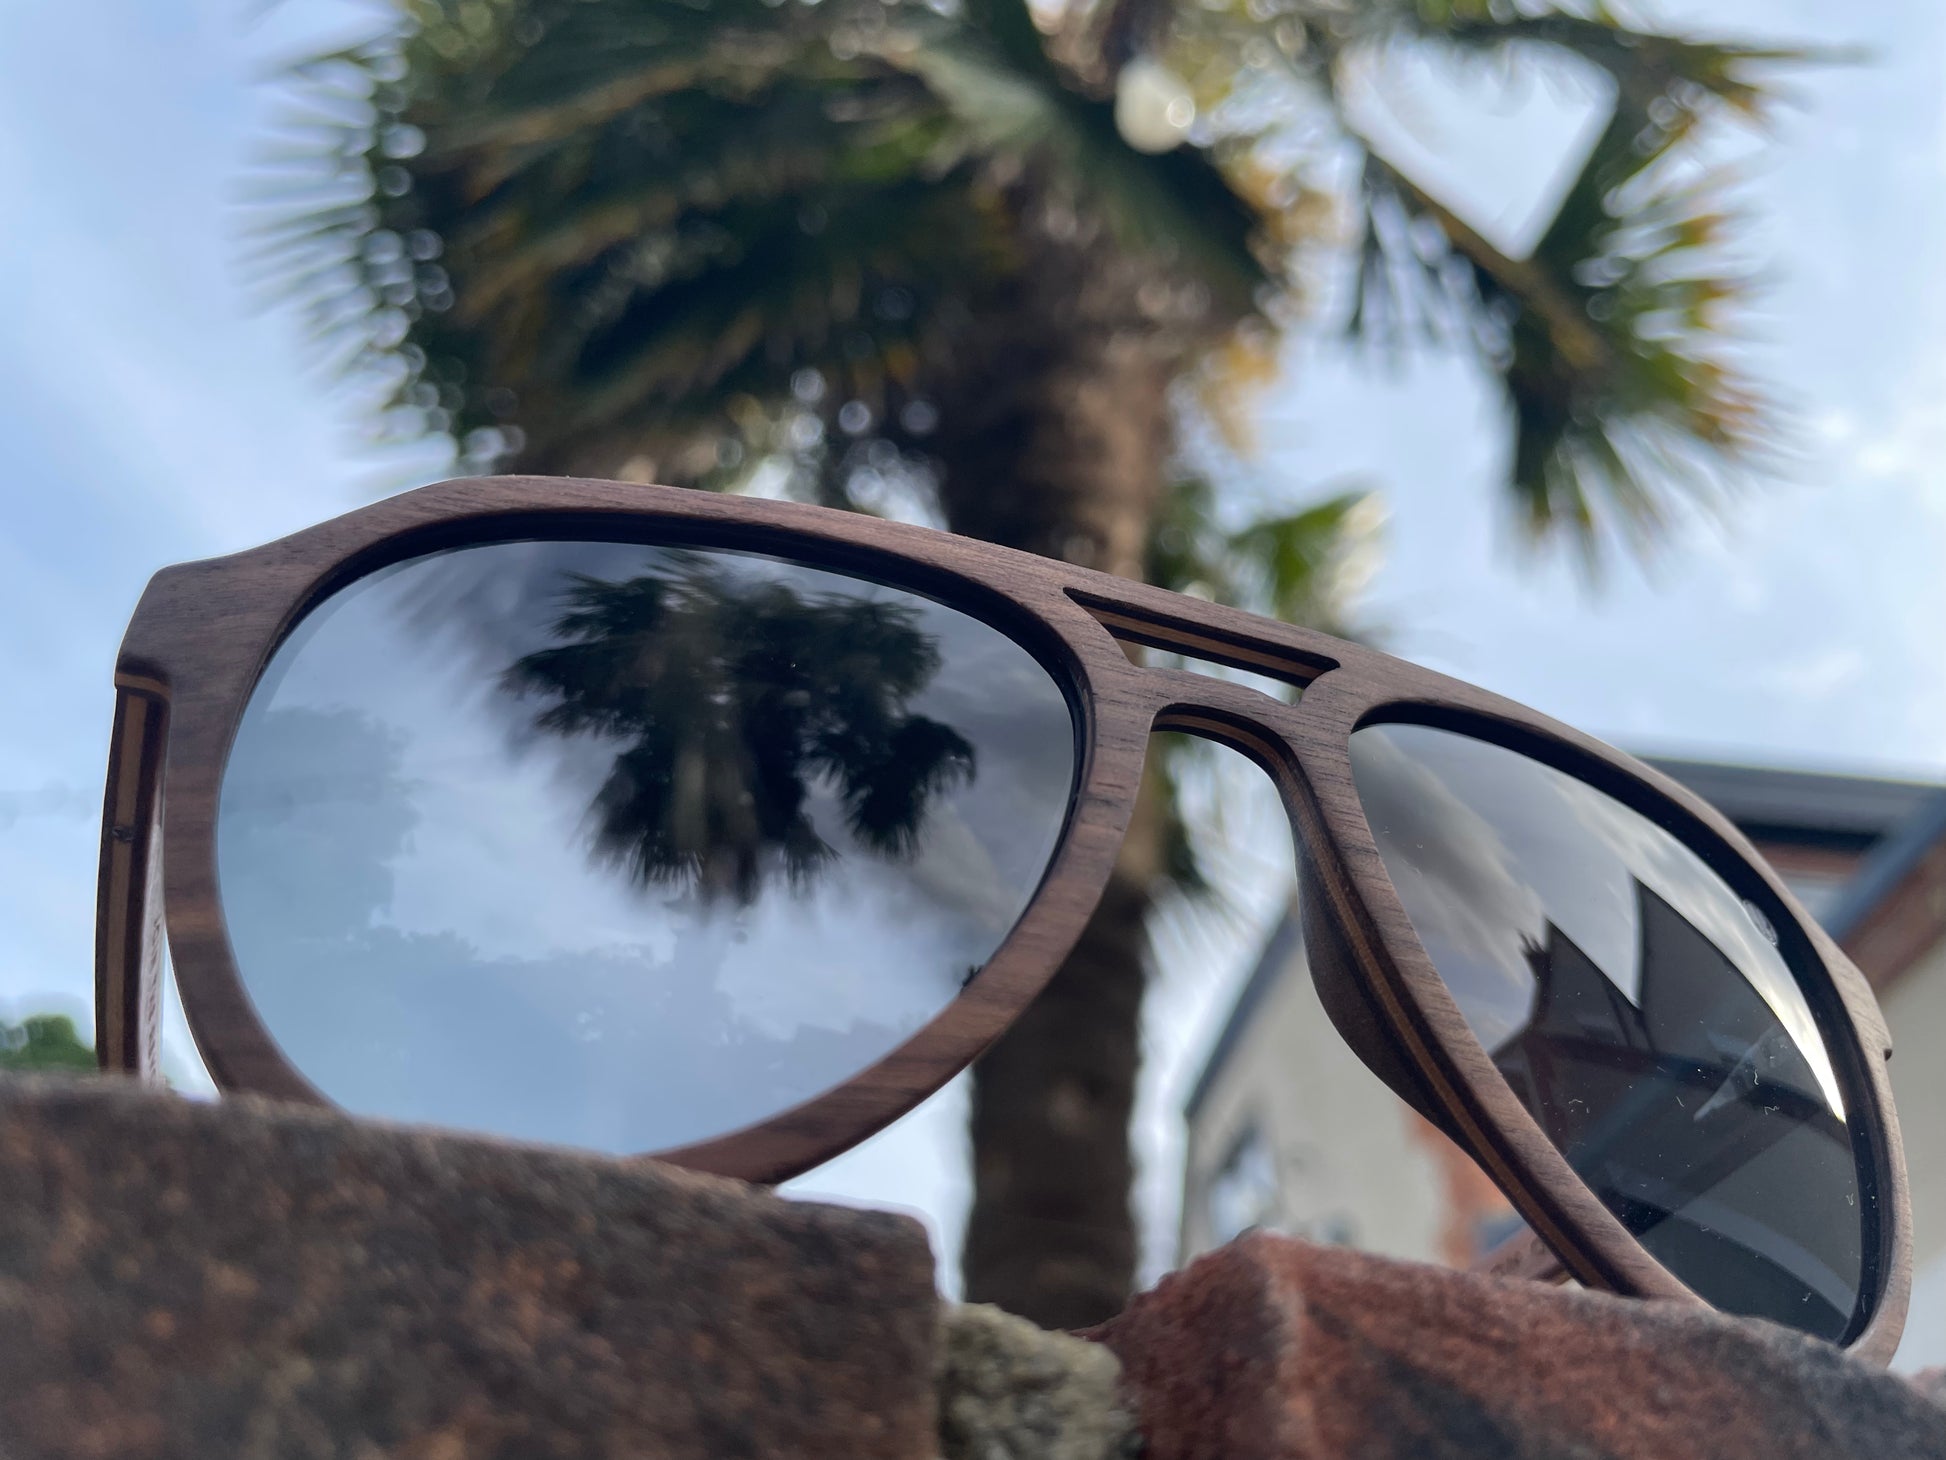 Eco Friendly SunglassesSolSol, Surf, Sand. Feel the cool breeze of sophistication with our Sol Walnut Edition sunglasses! Our lifestyle inspired design and waveology polarized lens are perfec